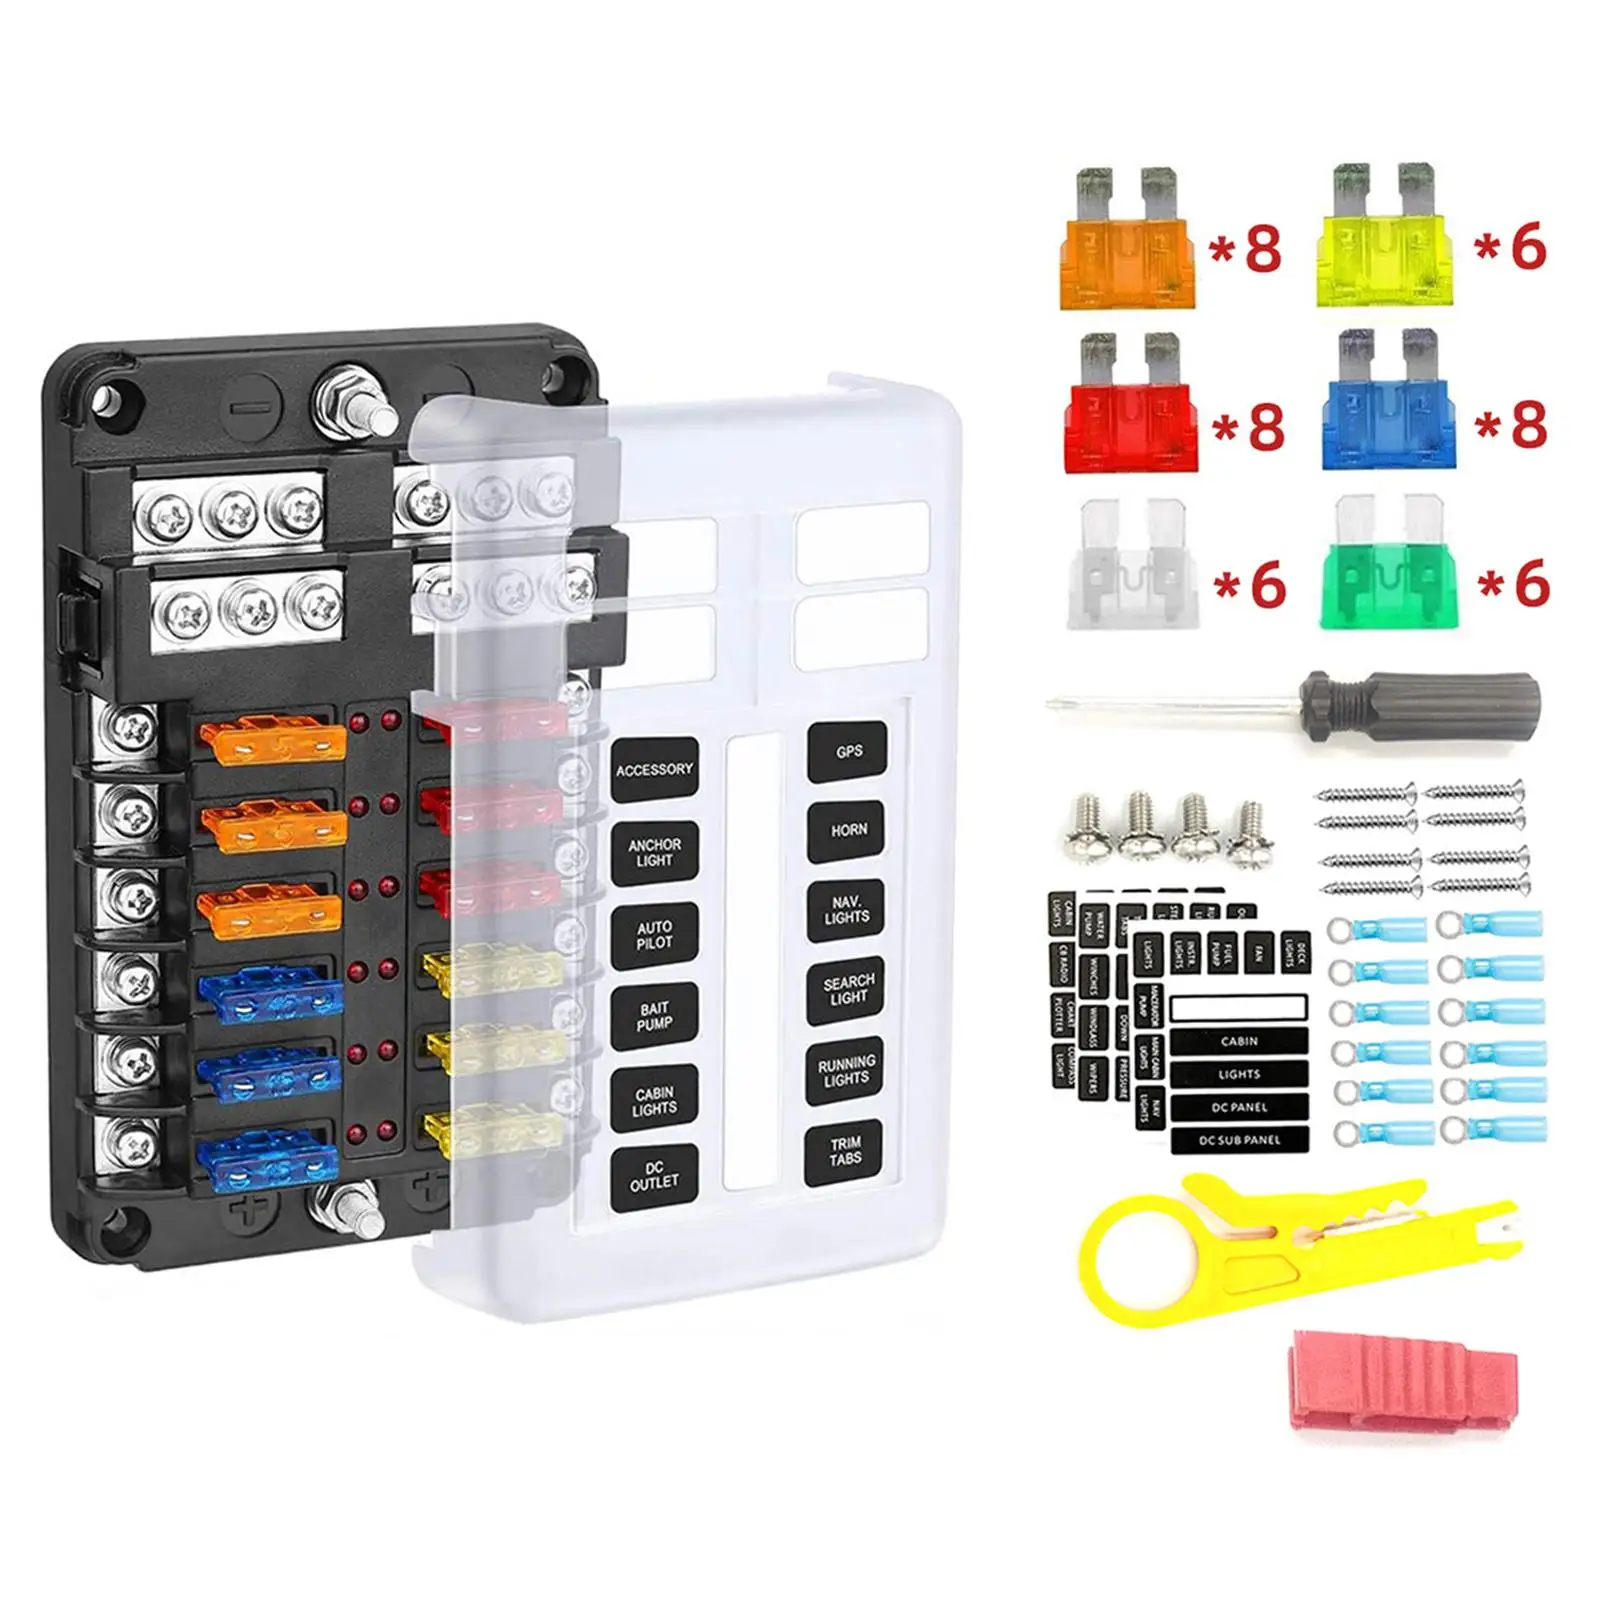 12 Circuit Fuse Block Fuse Box Holder Damp-Proof Cover Fuse Box for SUV Vehicle Marine RV Trailer